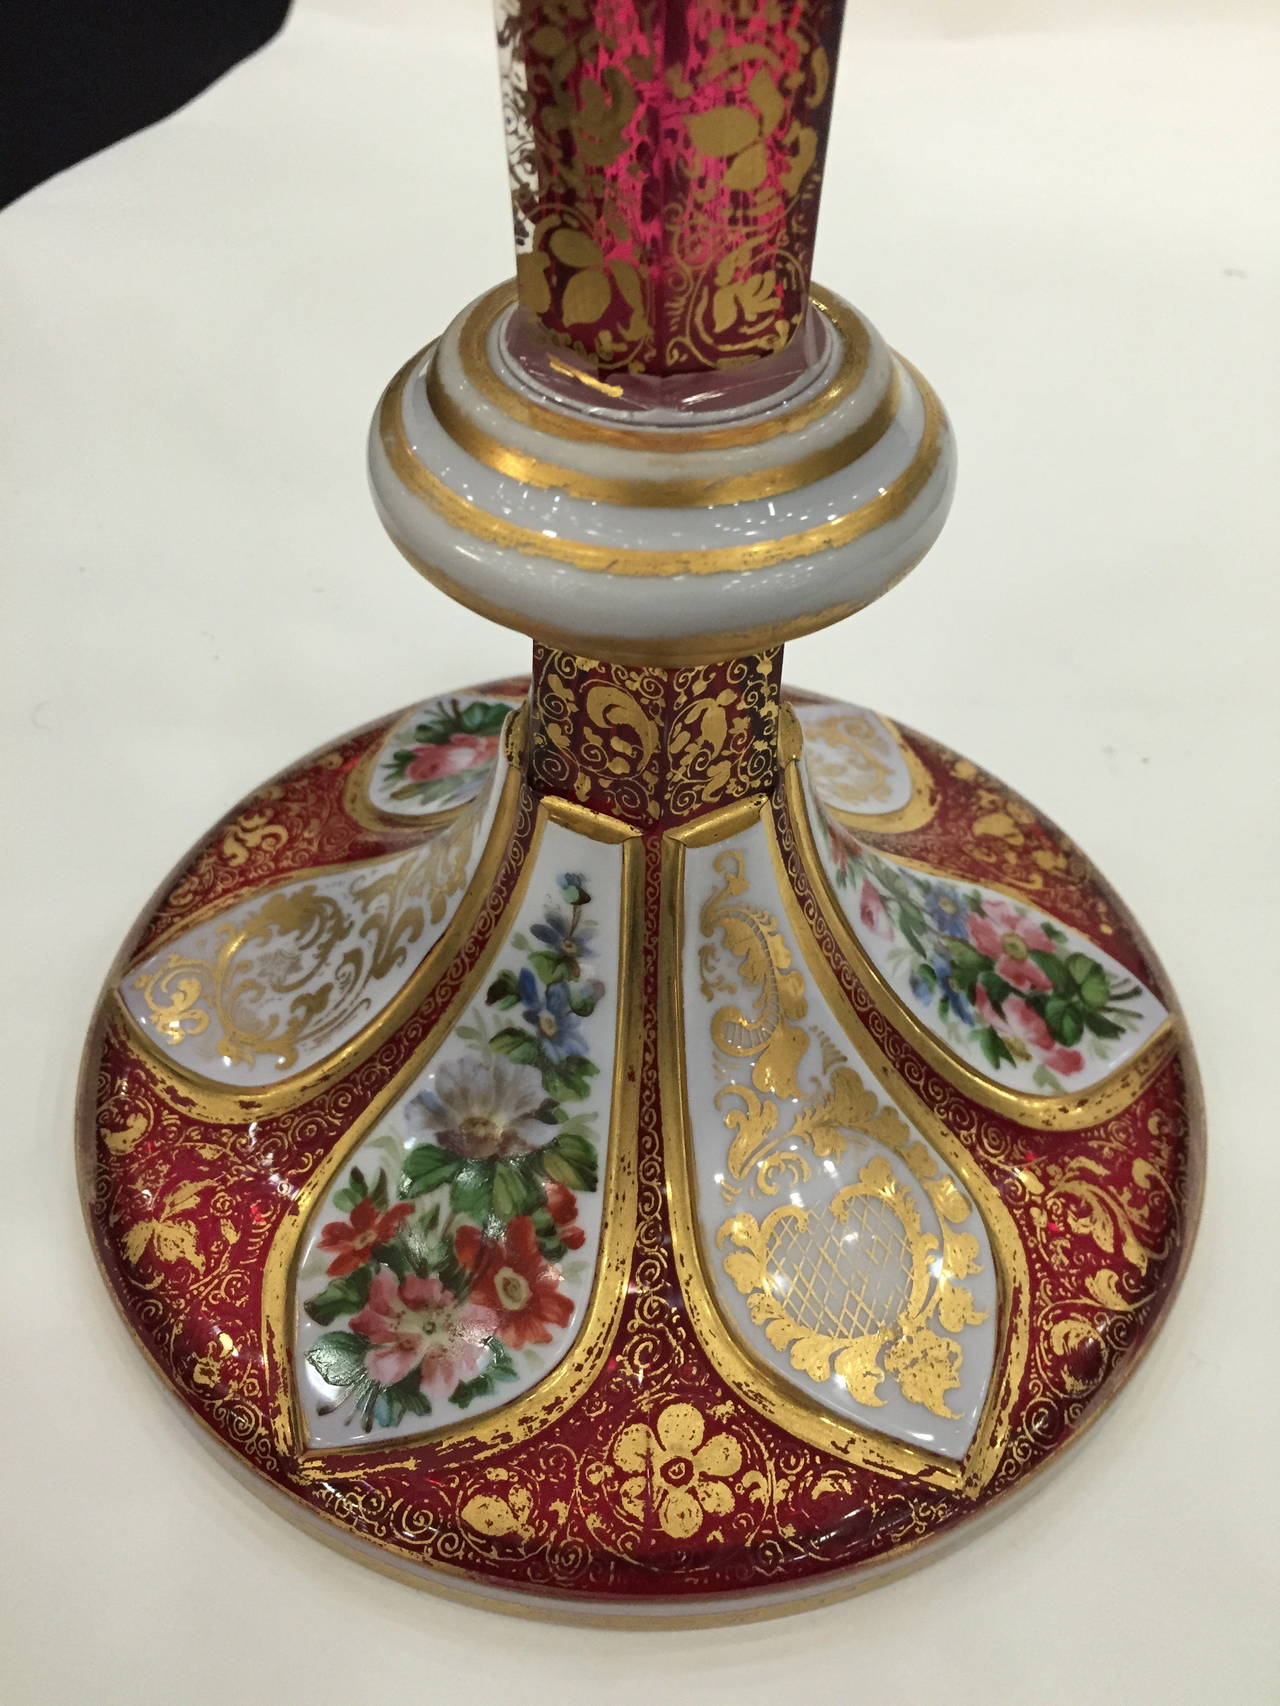  Antique Bohemian Overlay Glass Vase Painted Flowers, circa 1900 Large In Excellent Condition For Sale In Redding, CA